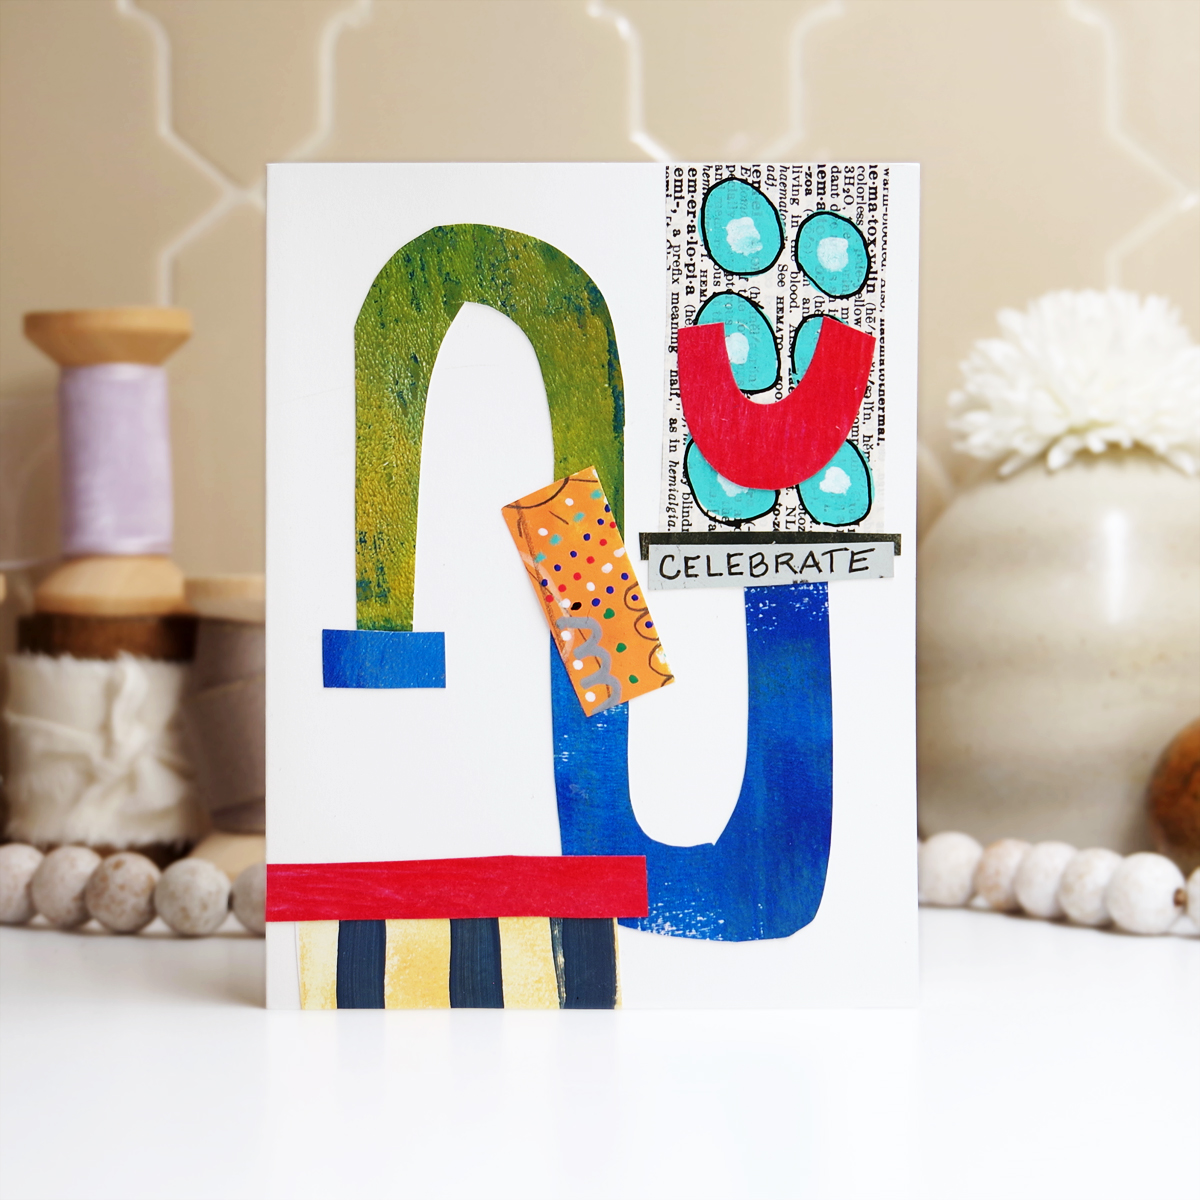 Easy DIY collage style birthday card made by cutting shapes from colored paper.